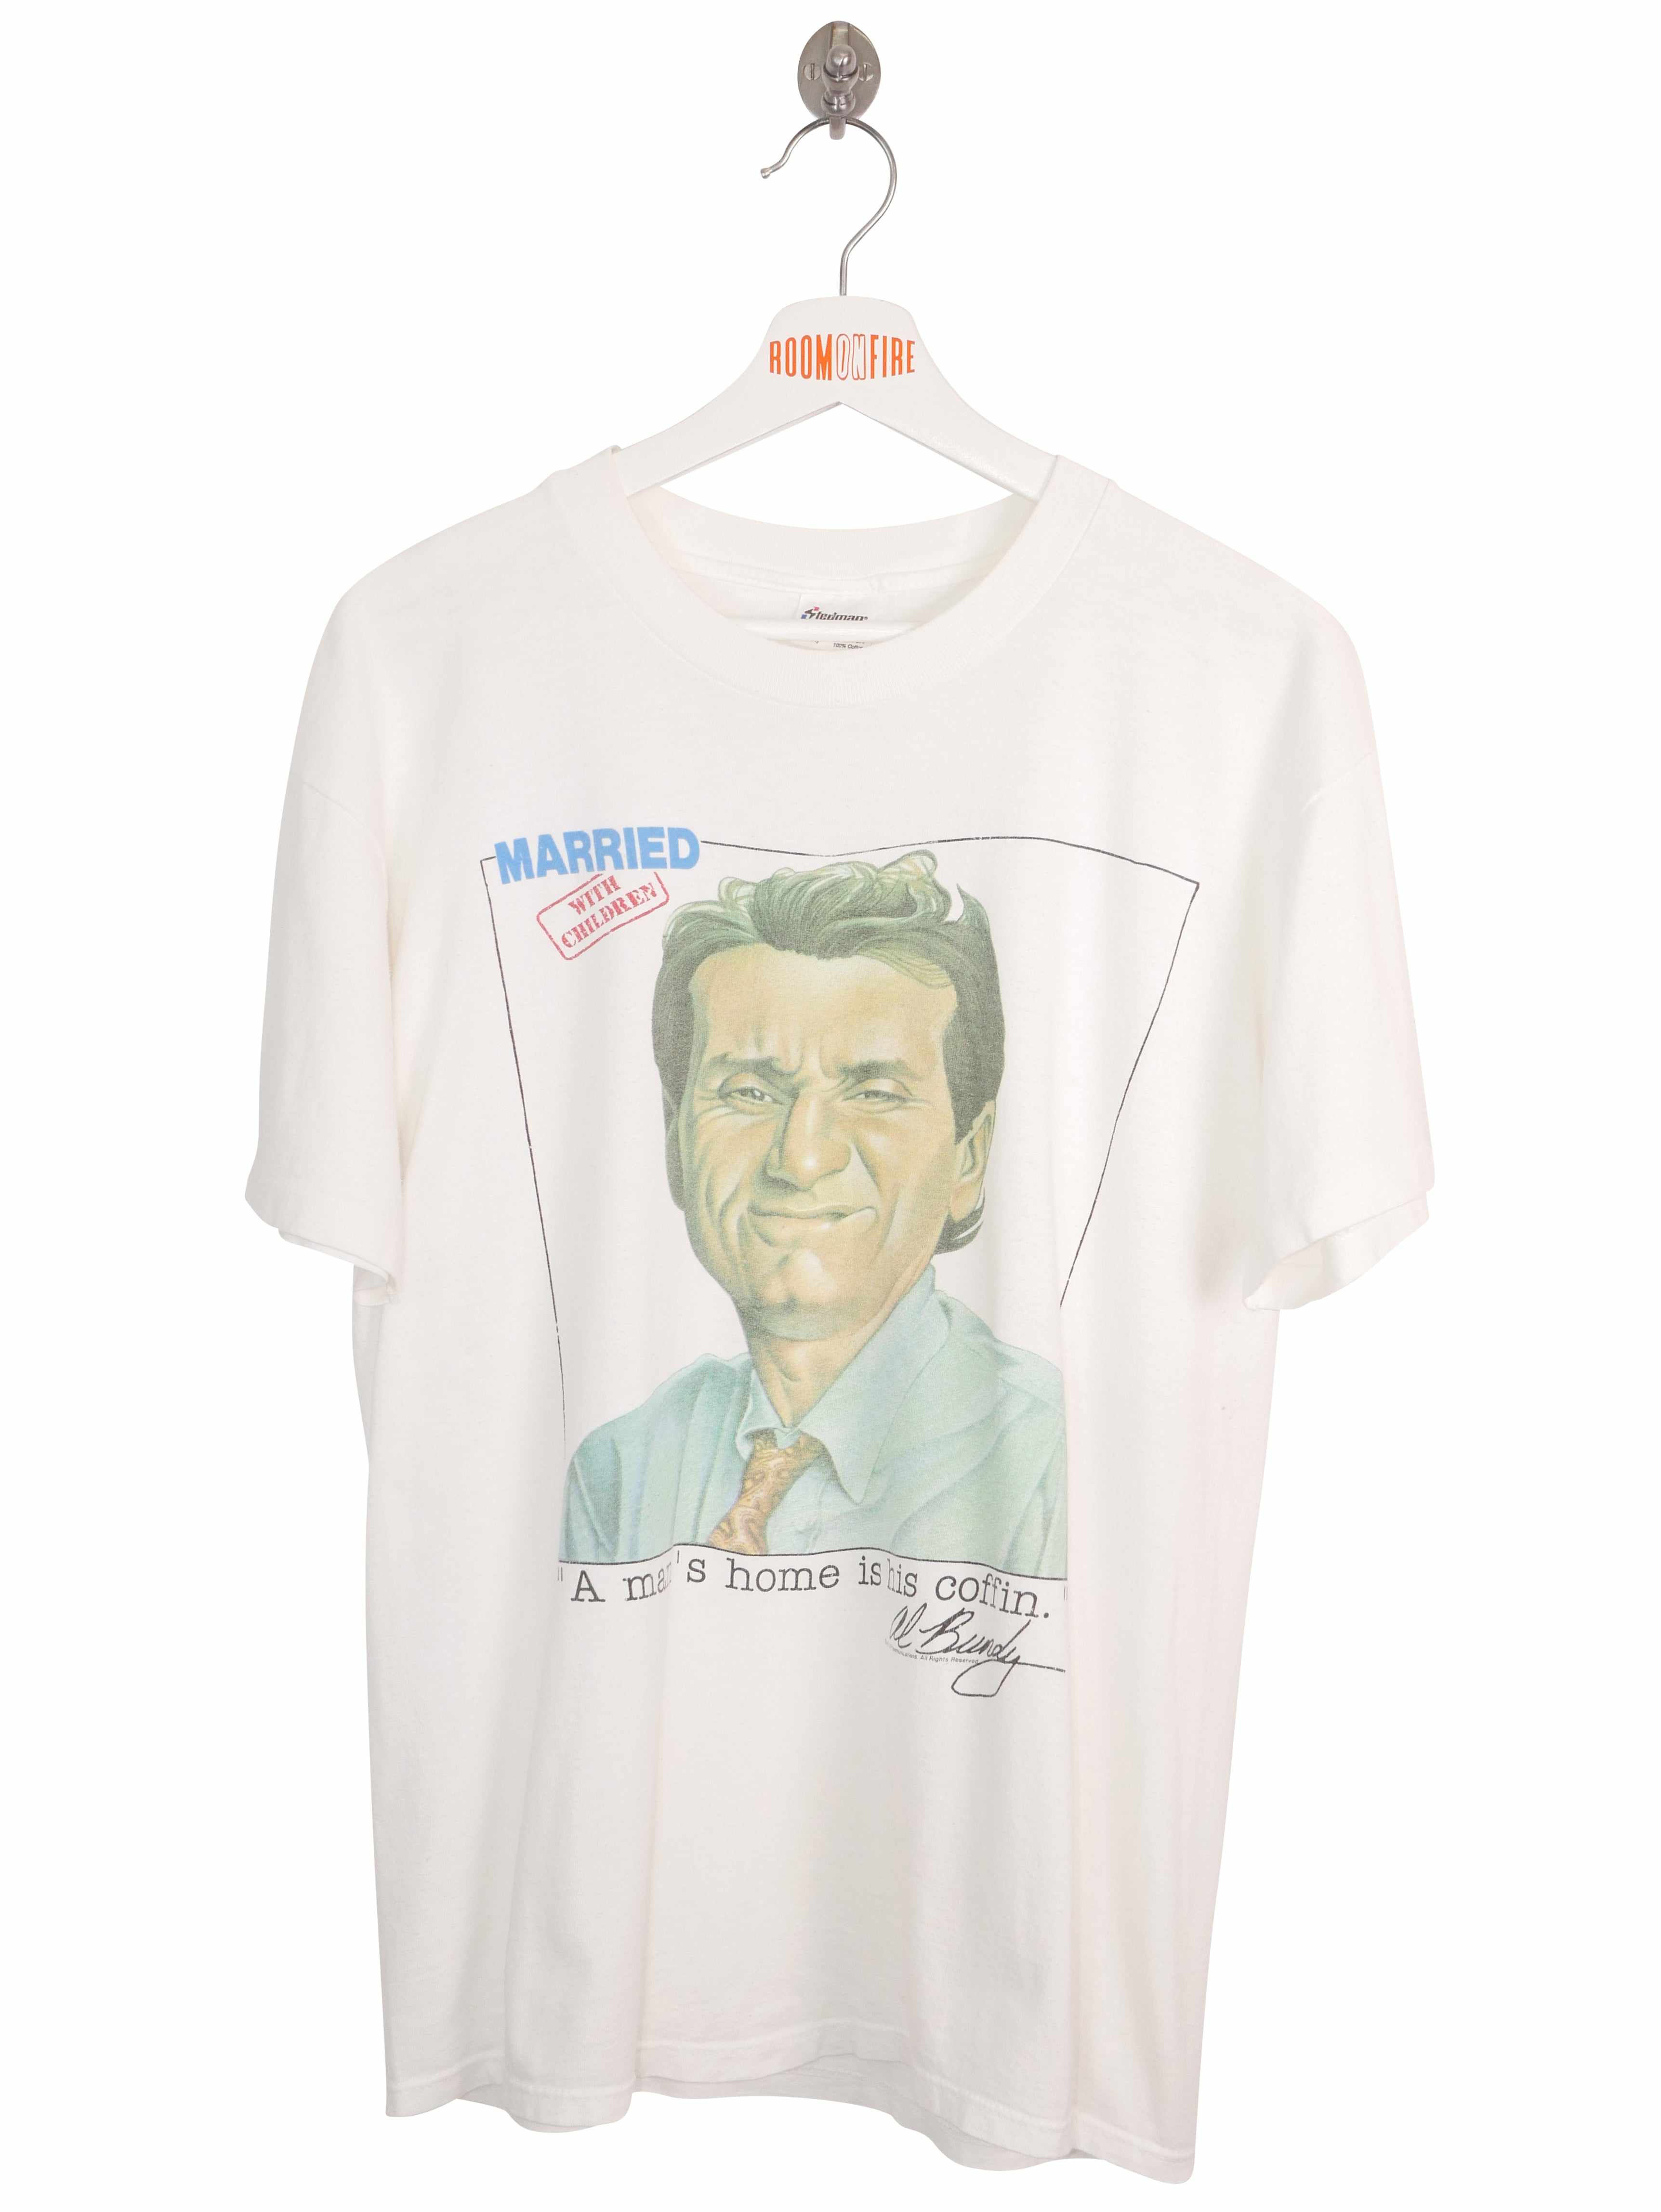 Vintage 1987 Married With Children 'A Man's Home Is His Coffin.' T-Shirt (M)-T-SHIRT-FILM & TV-SIZE M-Room On Fire